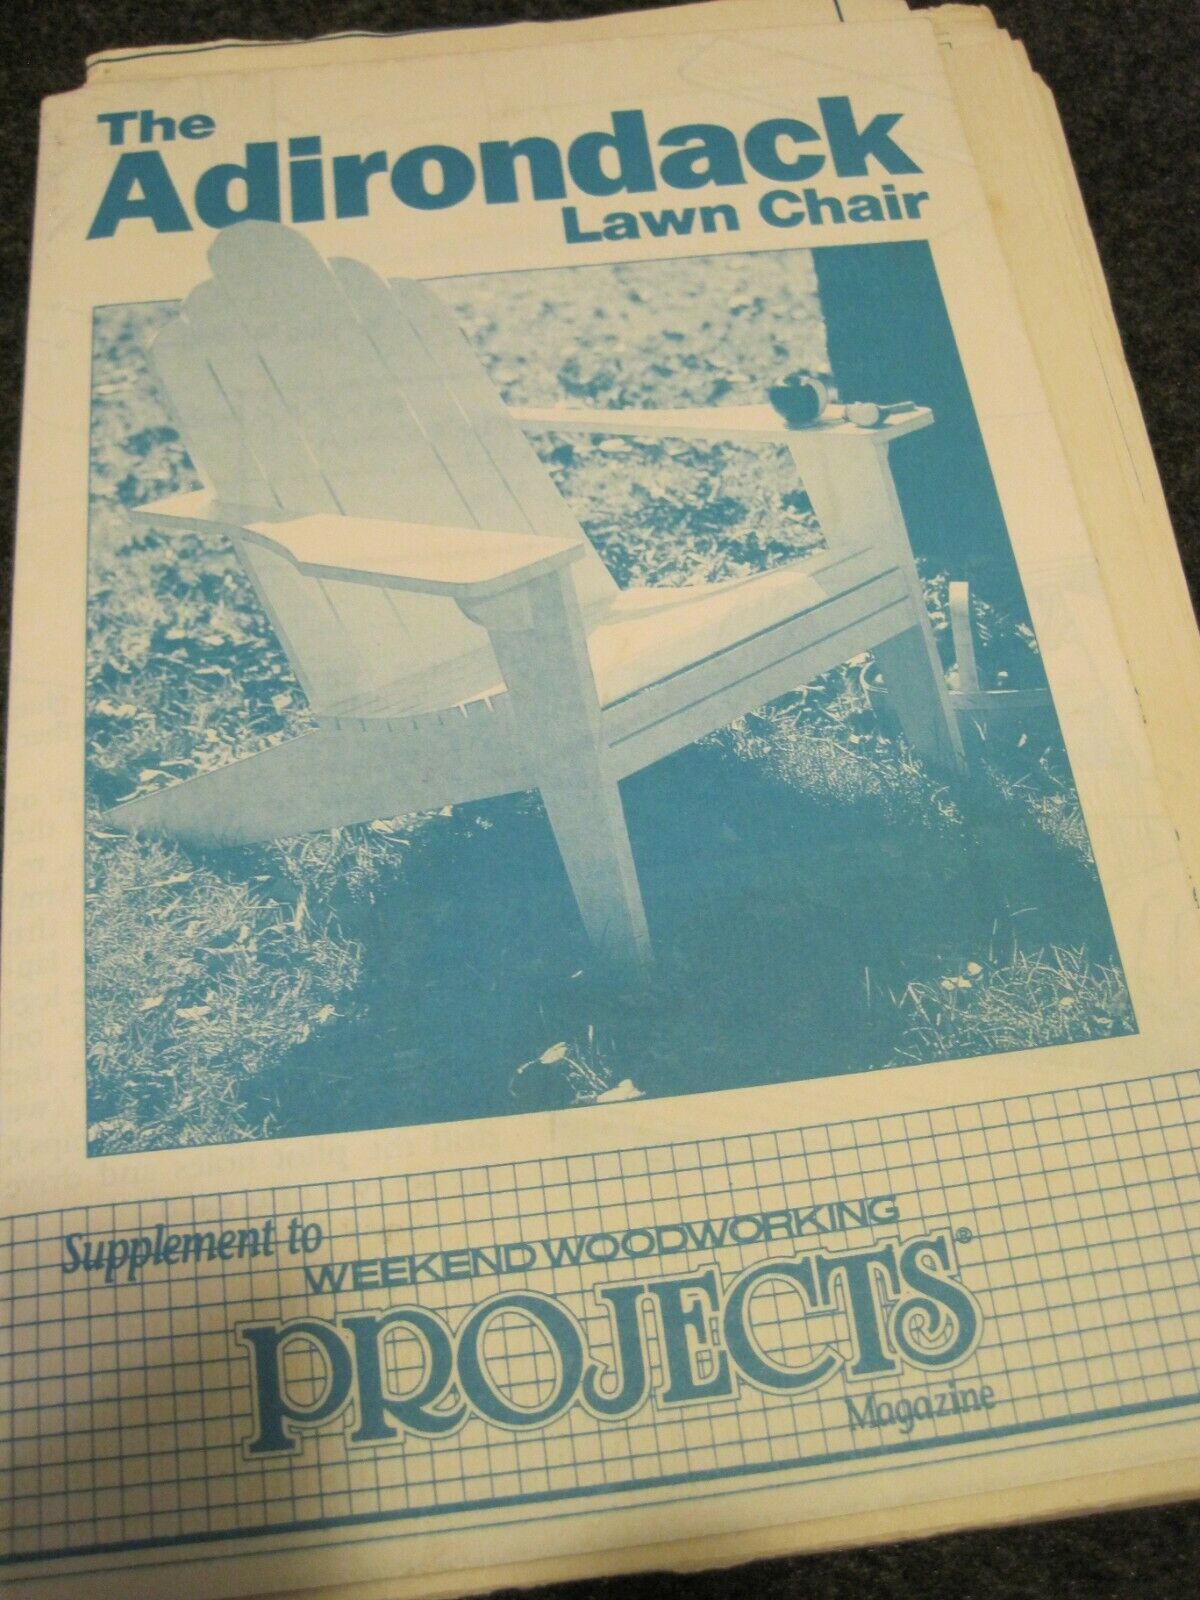 ADIRONDACK LAWN CHAIR Pattern Supplement to Weekend Woodworking Projects Vintage